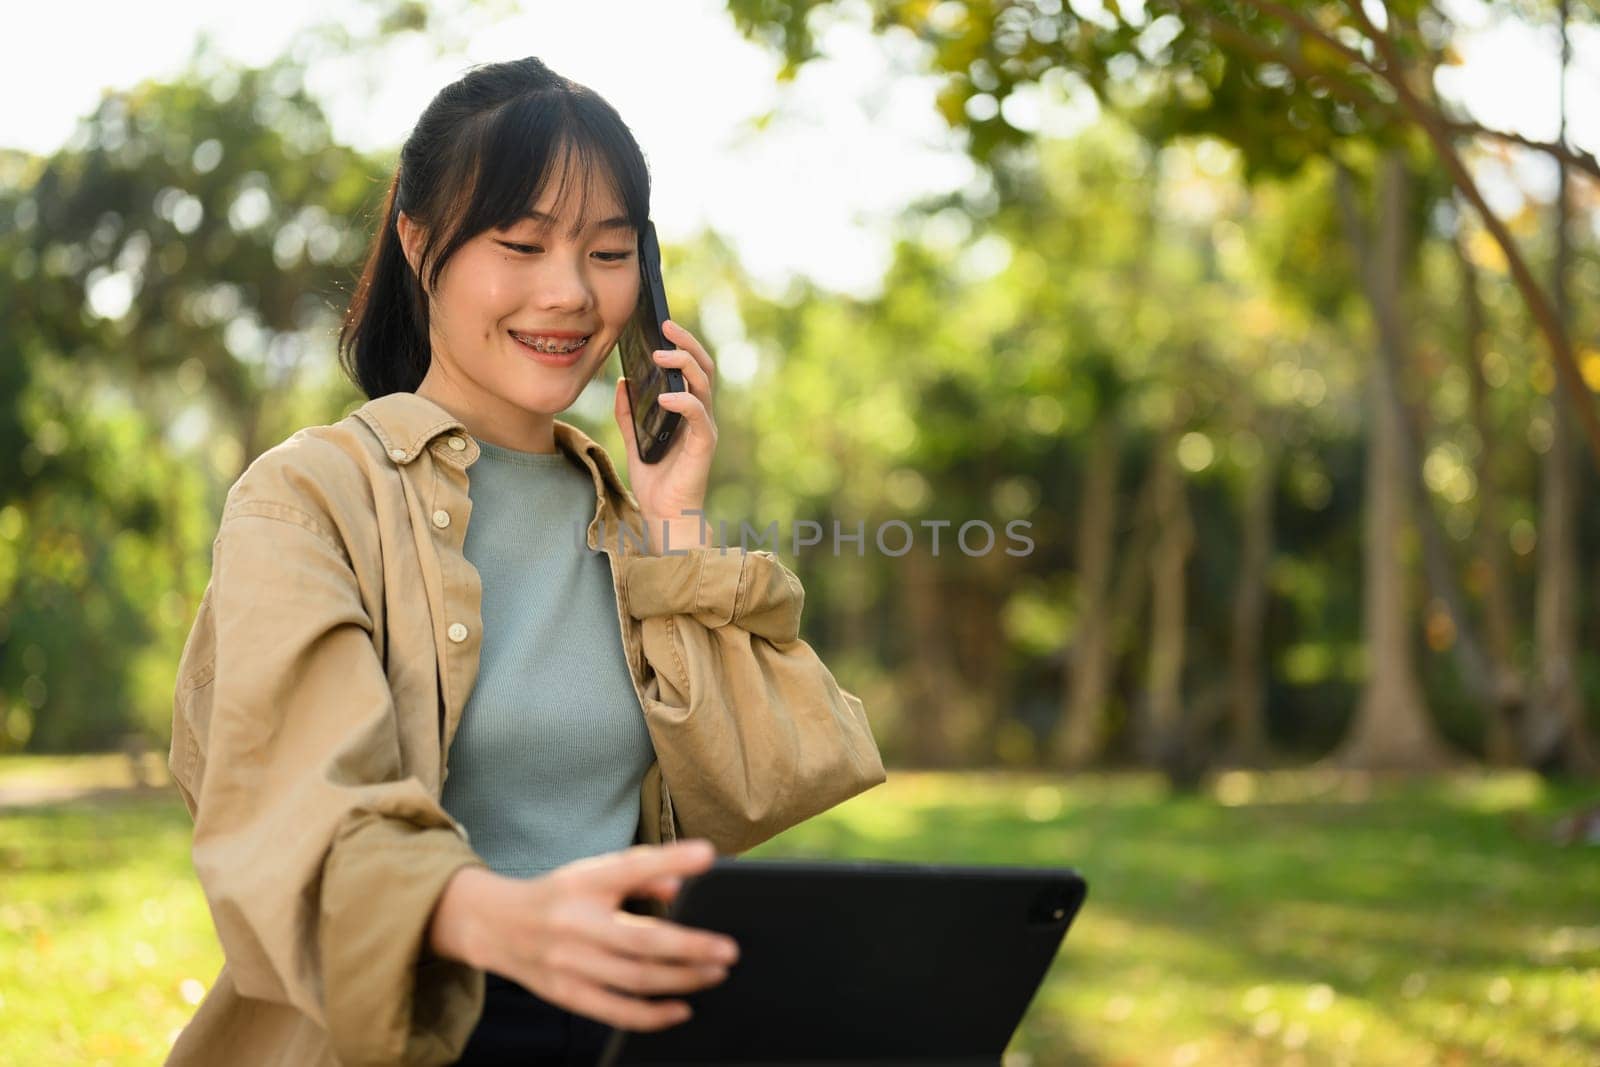 Smiling young woman talking on mobile phone and using digital tablet in the park on sunny day.